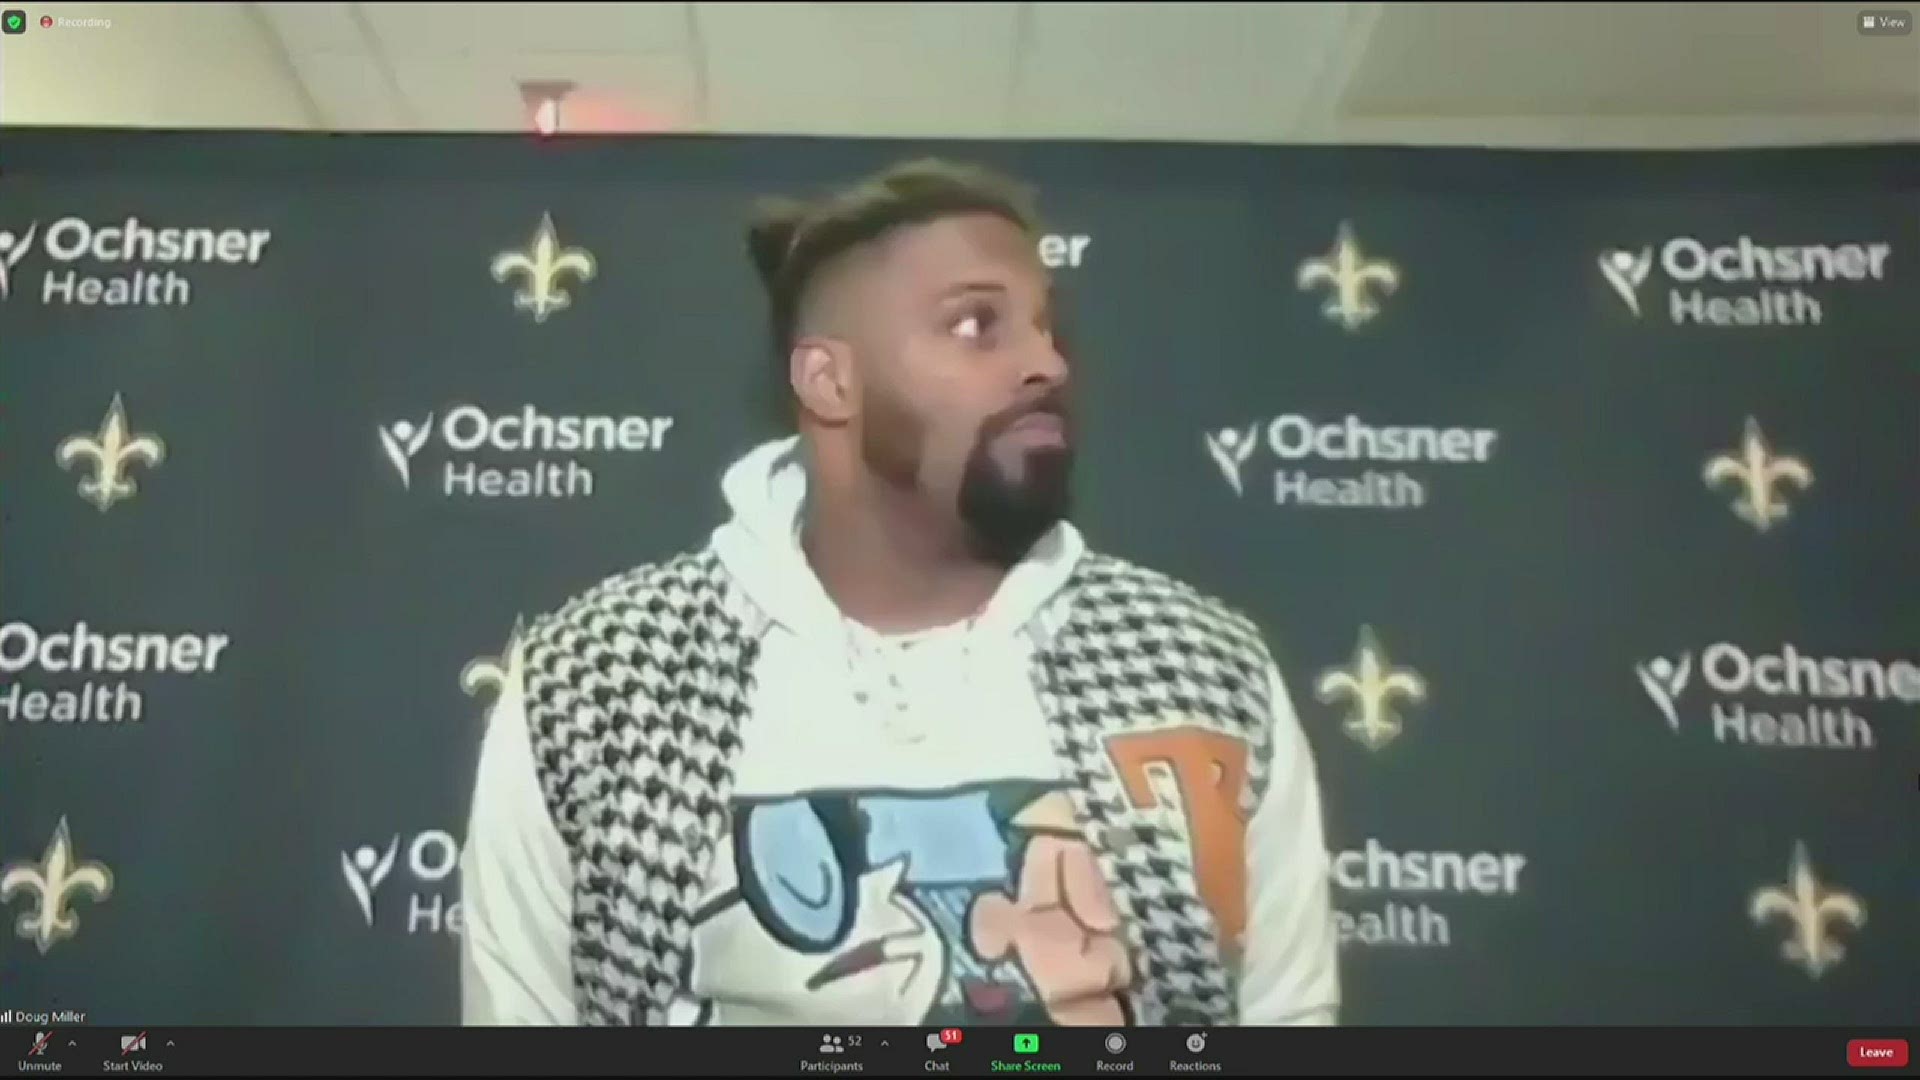 Cam Jordan's only regret is that he couldn't pour the slime himself.